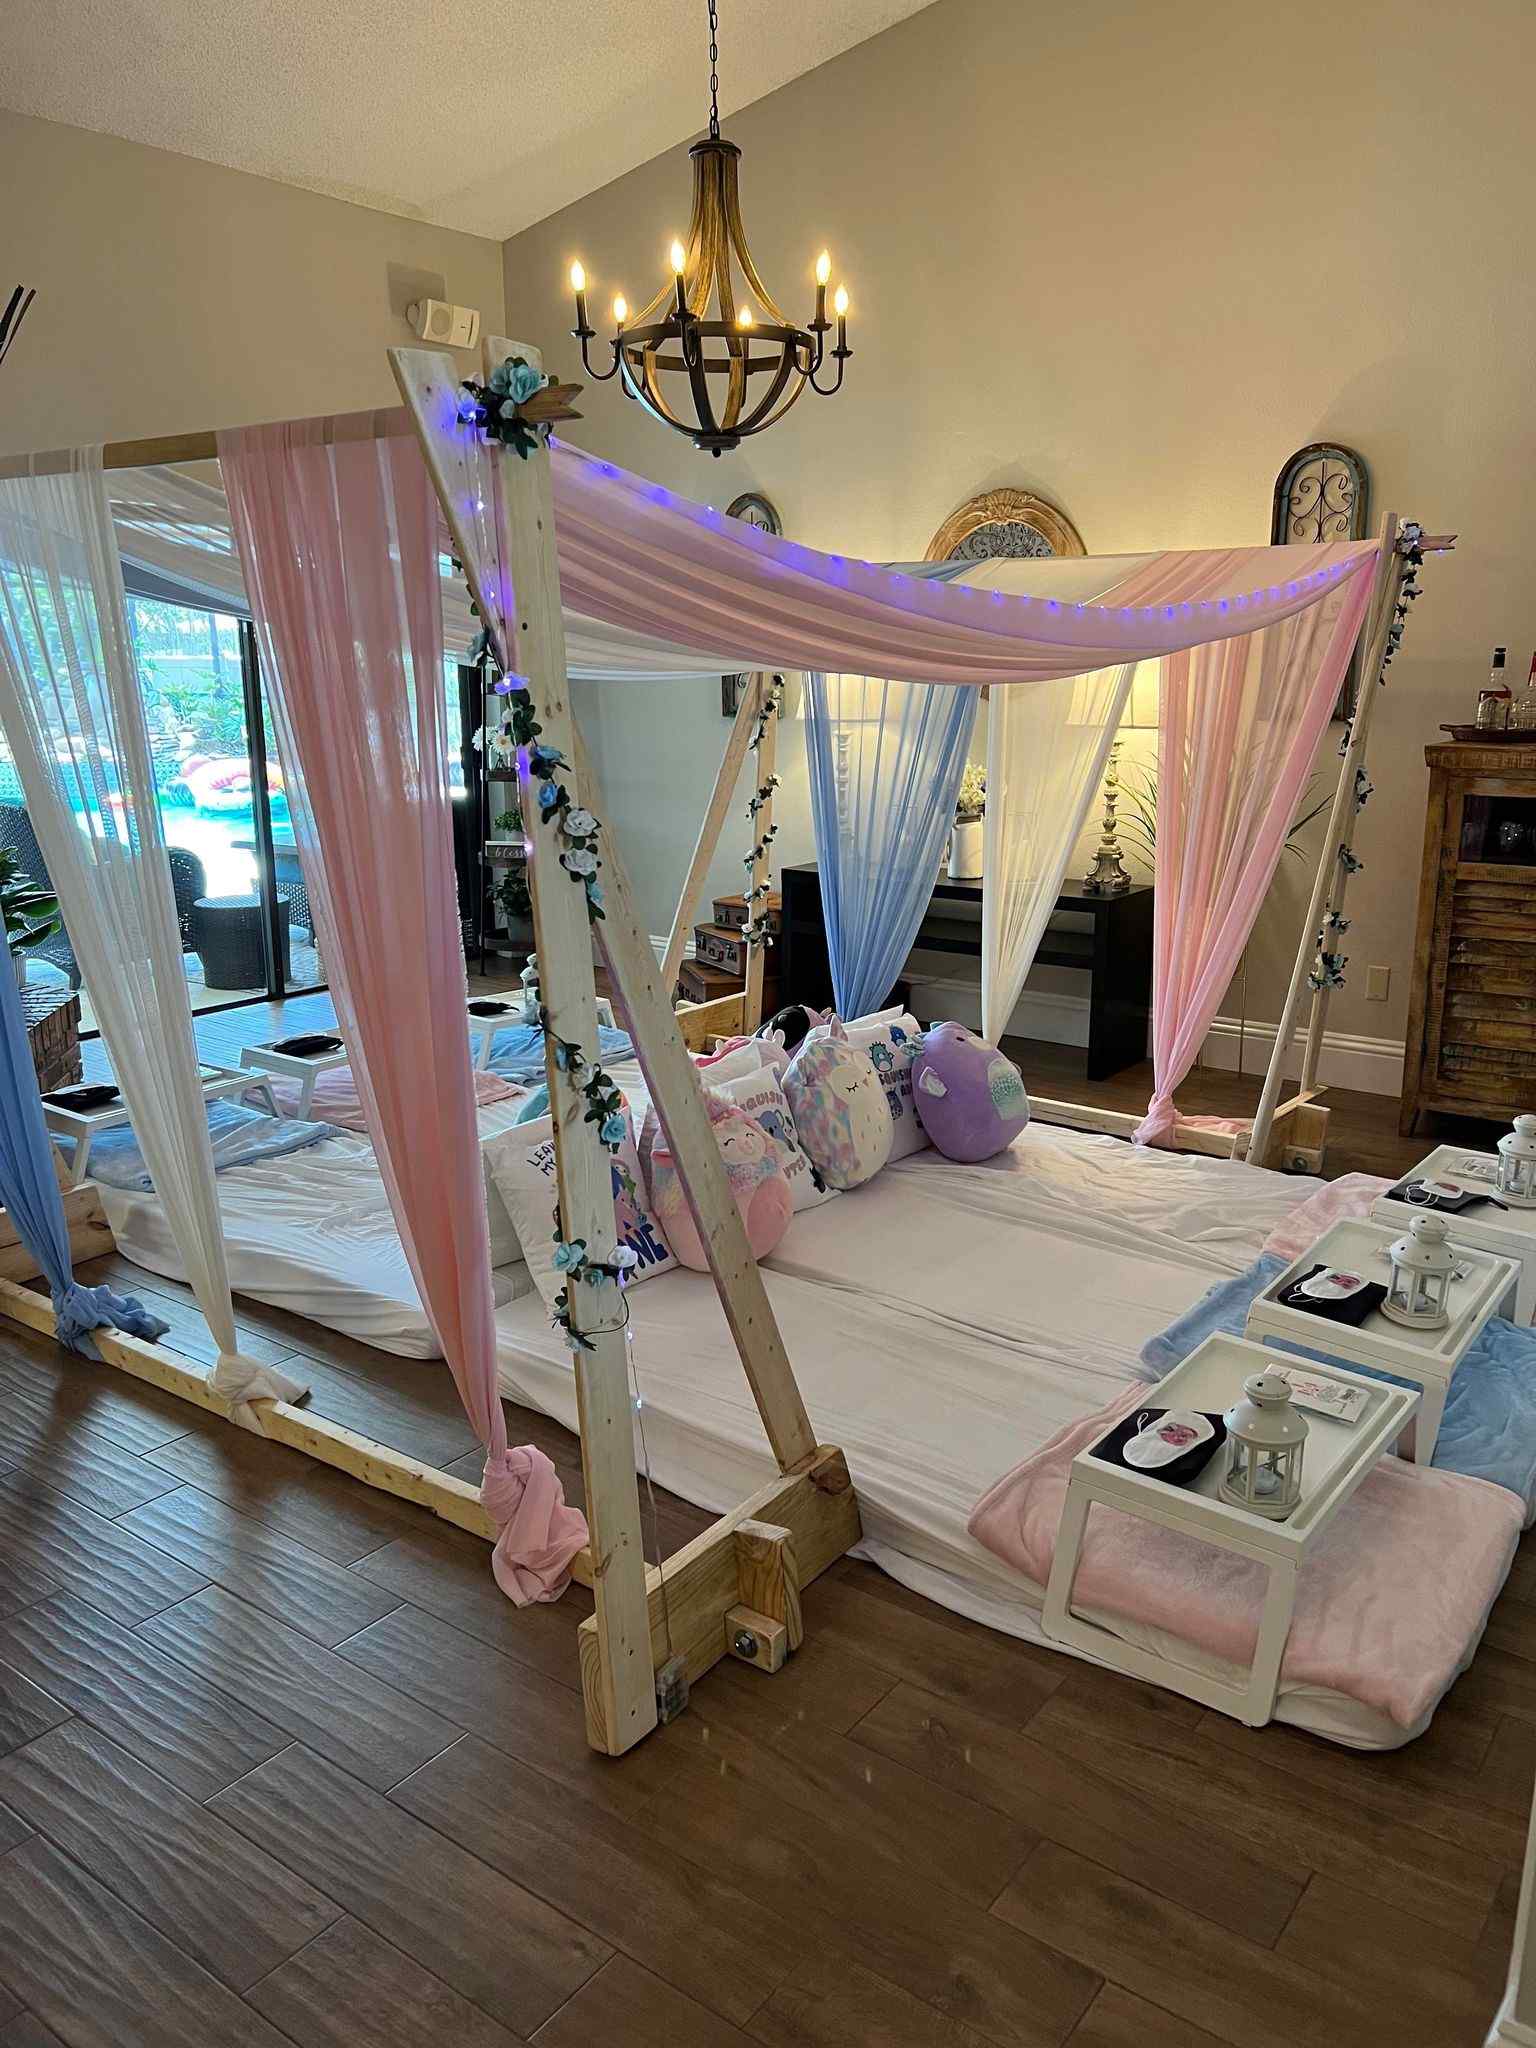 A cozy indoor canopy sleepover setup with draped pink and white curtains, decorative lights, and surrounding plush cushions.